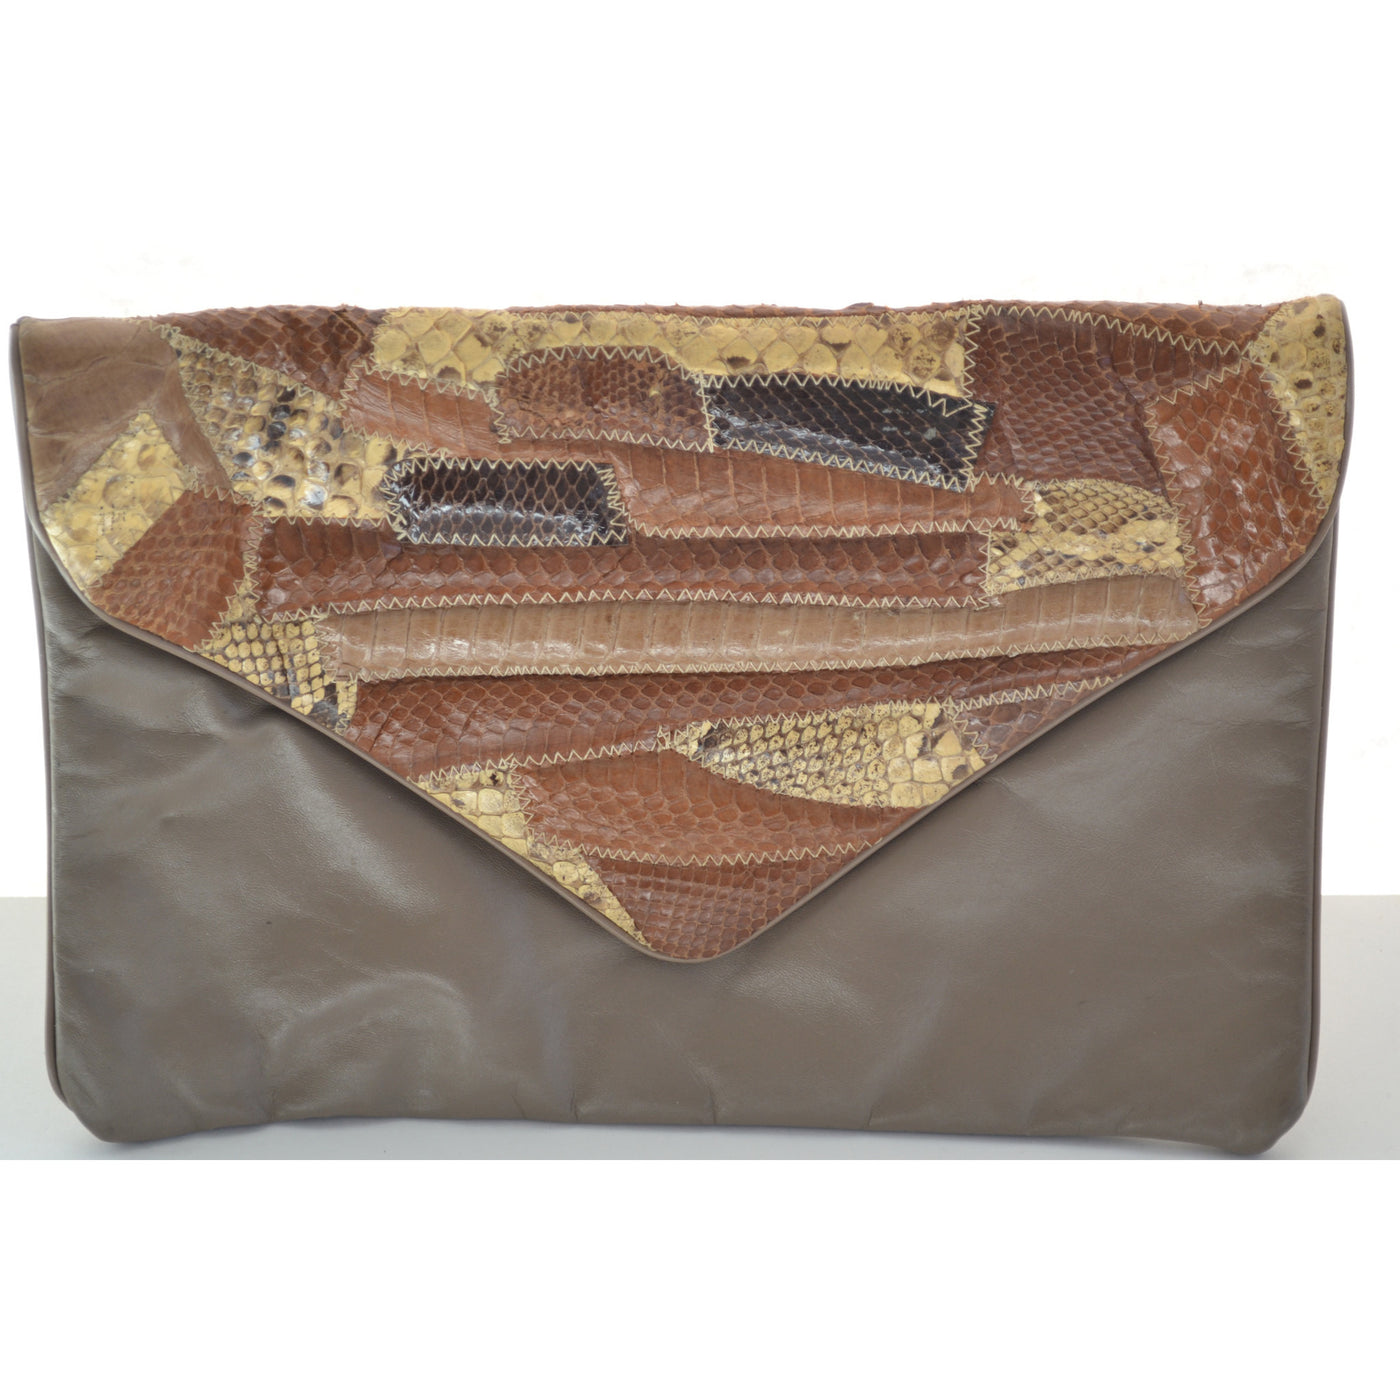 Vintage Brown Patched Reptile Leather Clutch Purse by Hala 